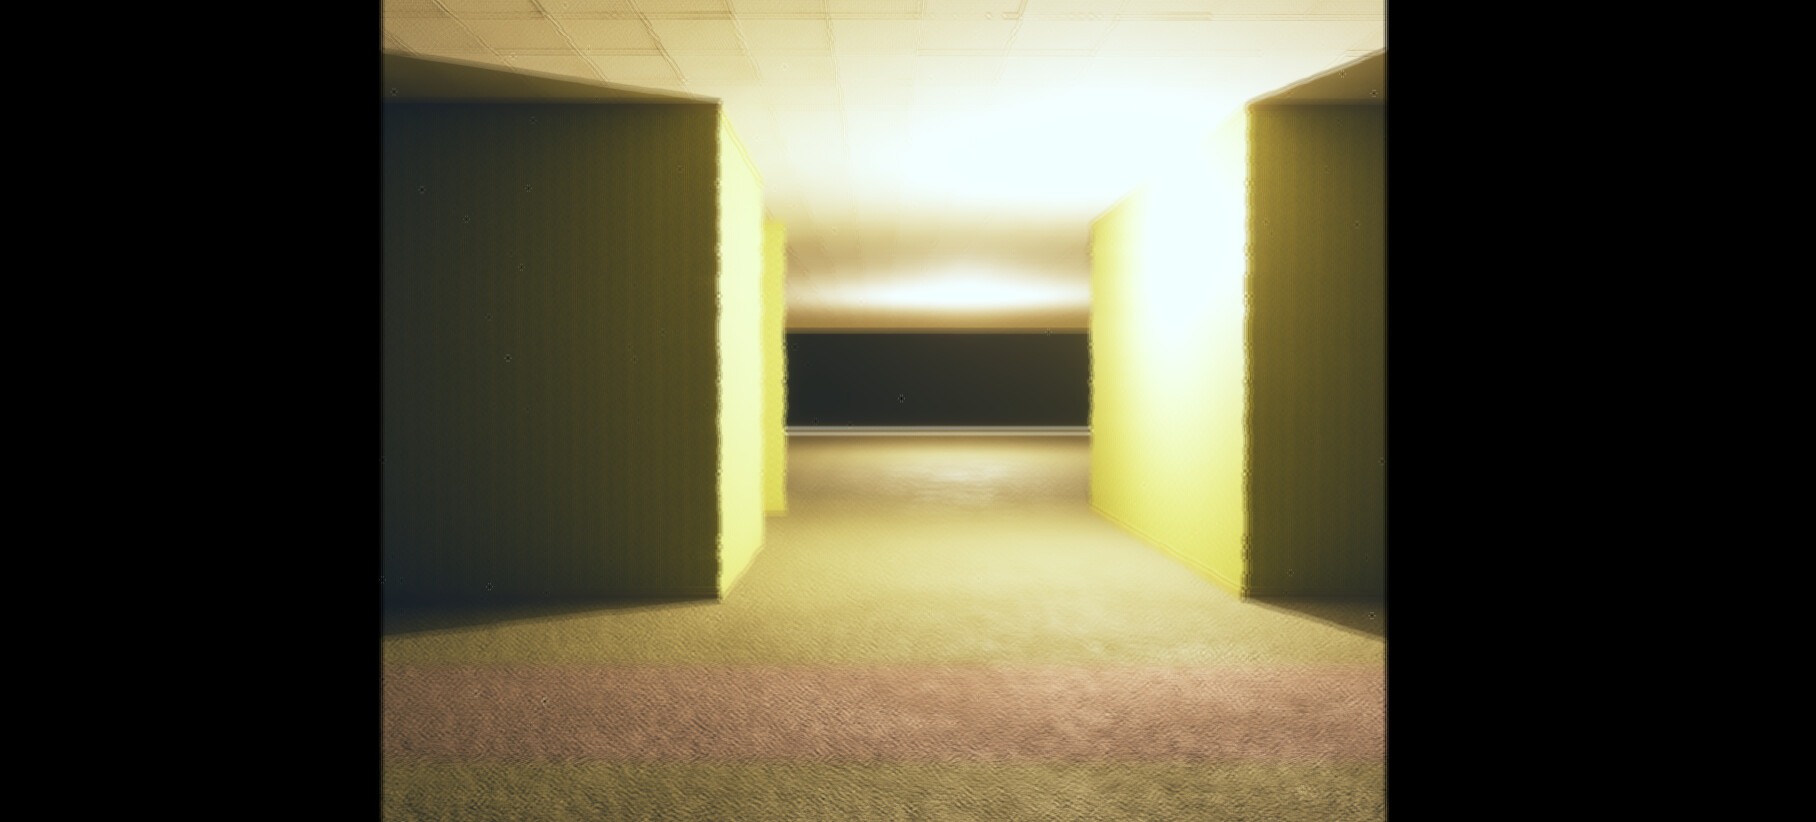 Procedural Backrooms Game In Roblox [info in comment] : r/backrooms